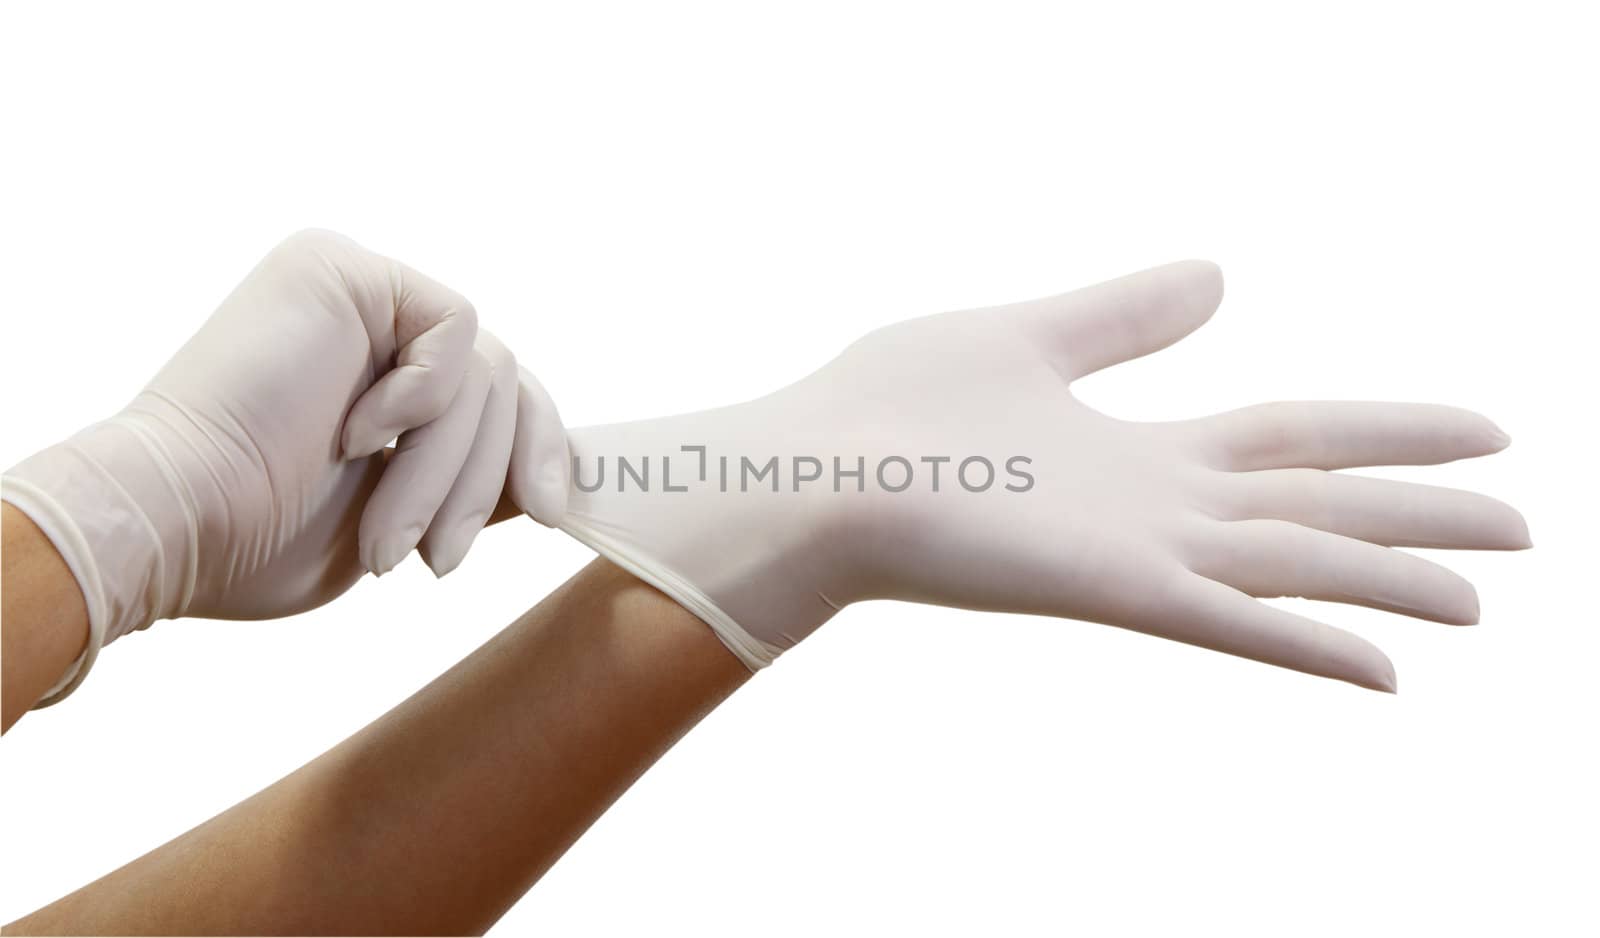 Surgical gloves by RazvanPhotography